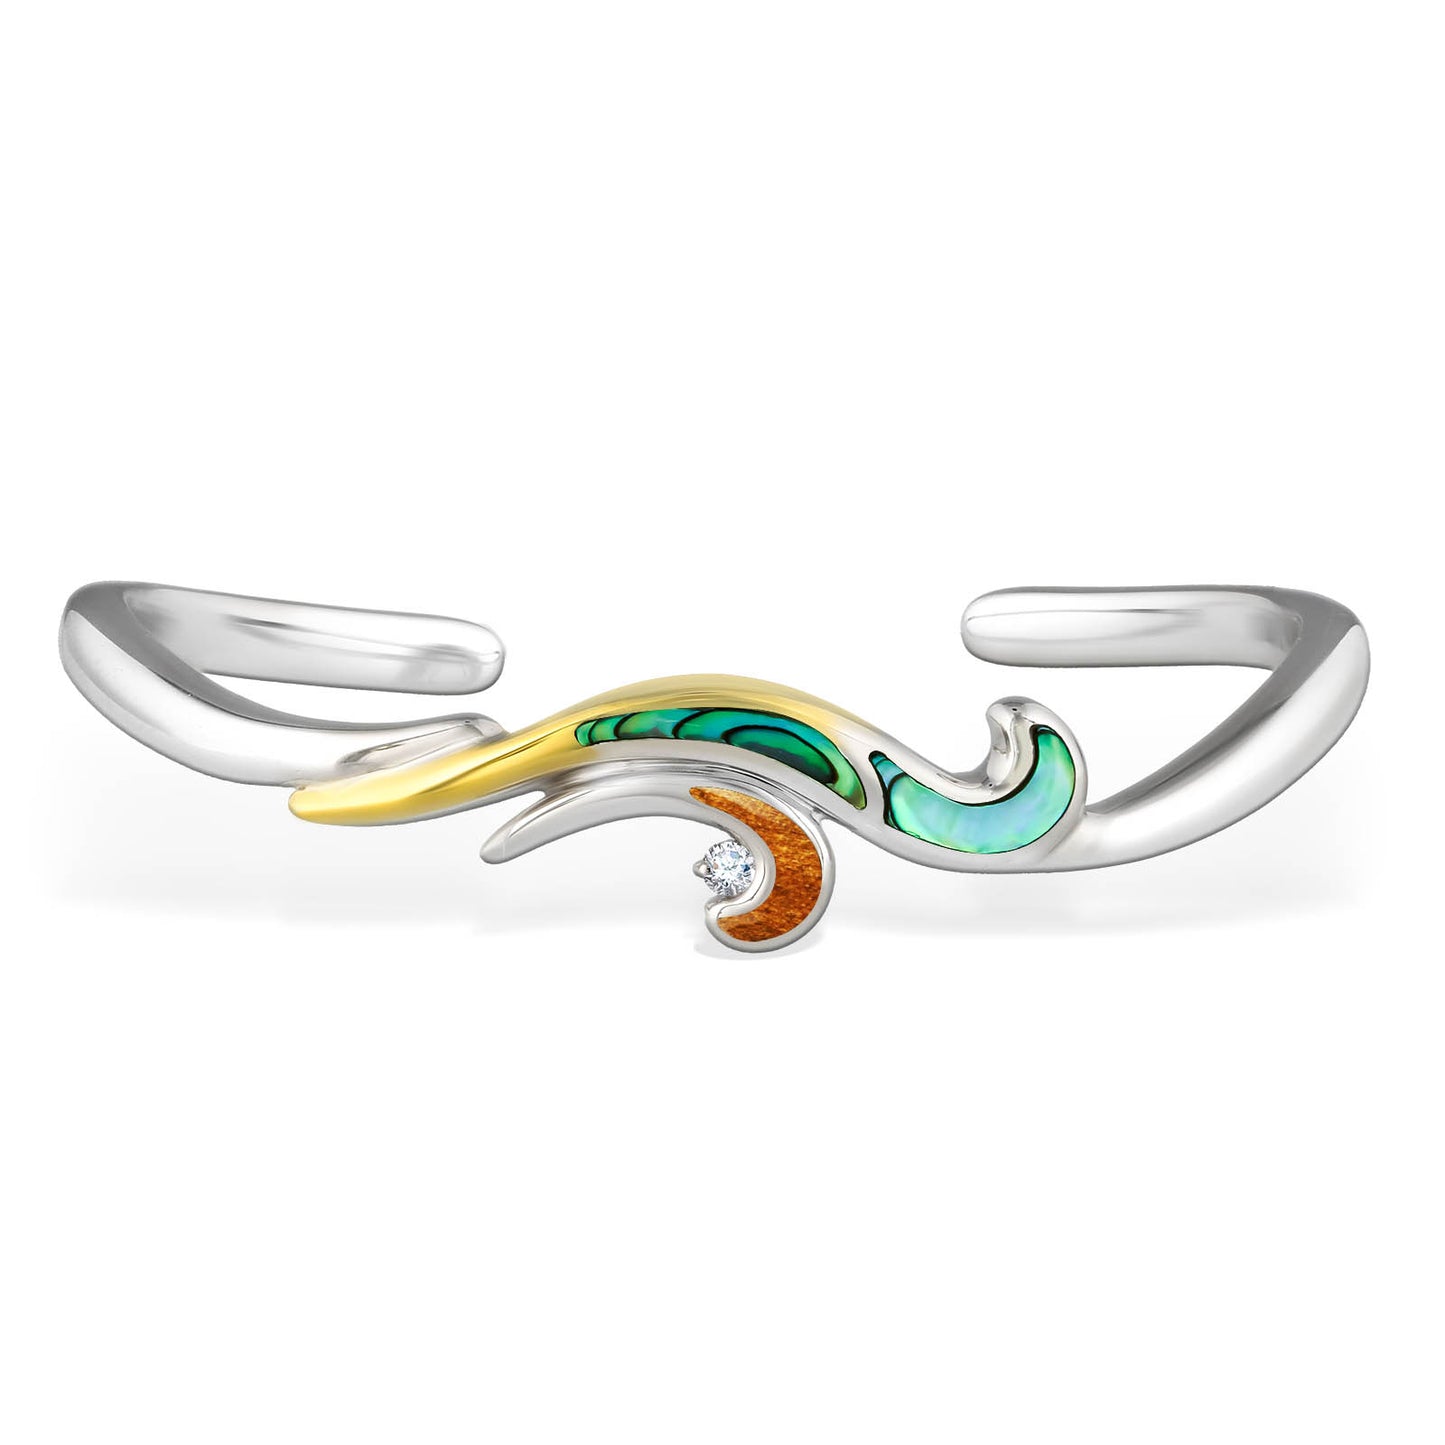 44389 - 18K Yellow Gold and Sterling Silver - Waterfall Cuff Bracelet